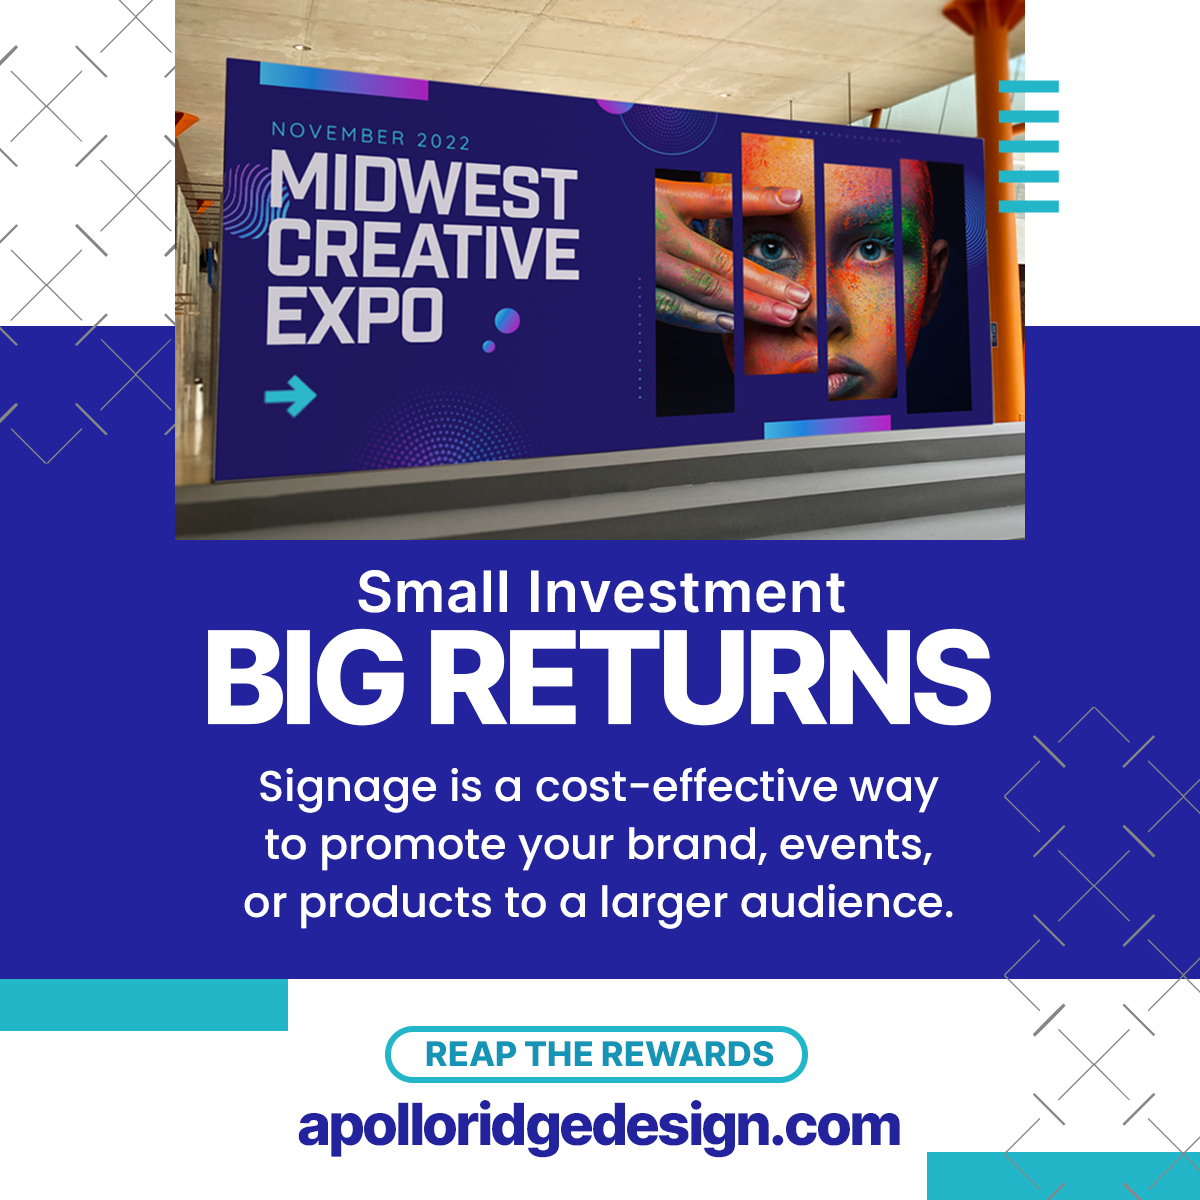 Creative signage is an effective way to increase your audience exposure on a budget. Contact us to get started - info@apolloridgedesign.com

#SignageSolutions #VisualStrategy #BrandExposure #MarketingOnABudget #SMBMarketing #EffectiveAdvertising #CreativeSigns #SignDesign